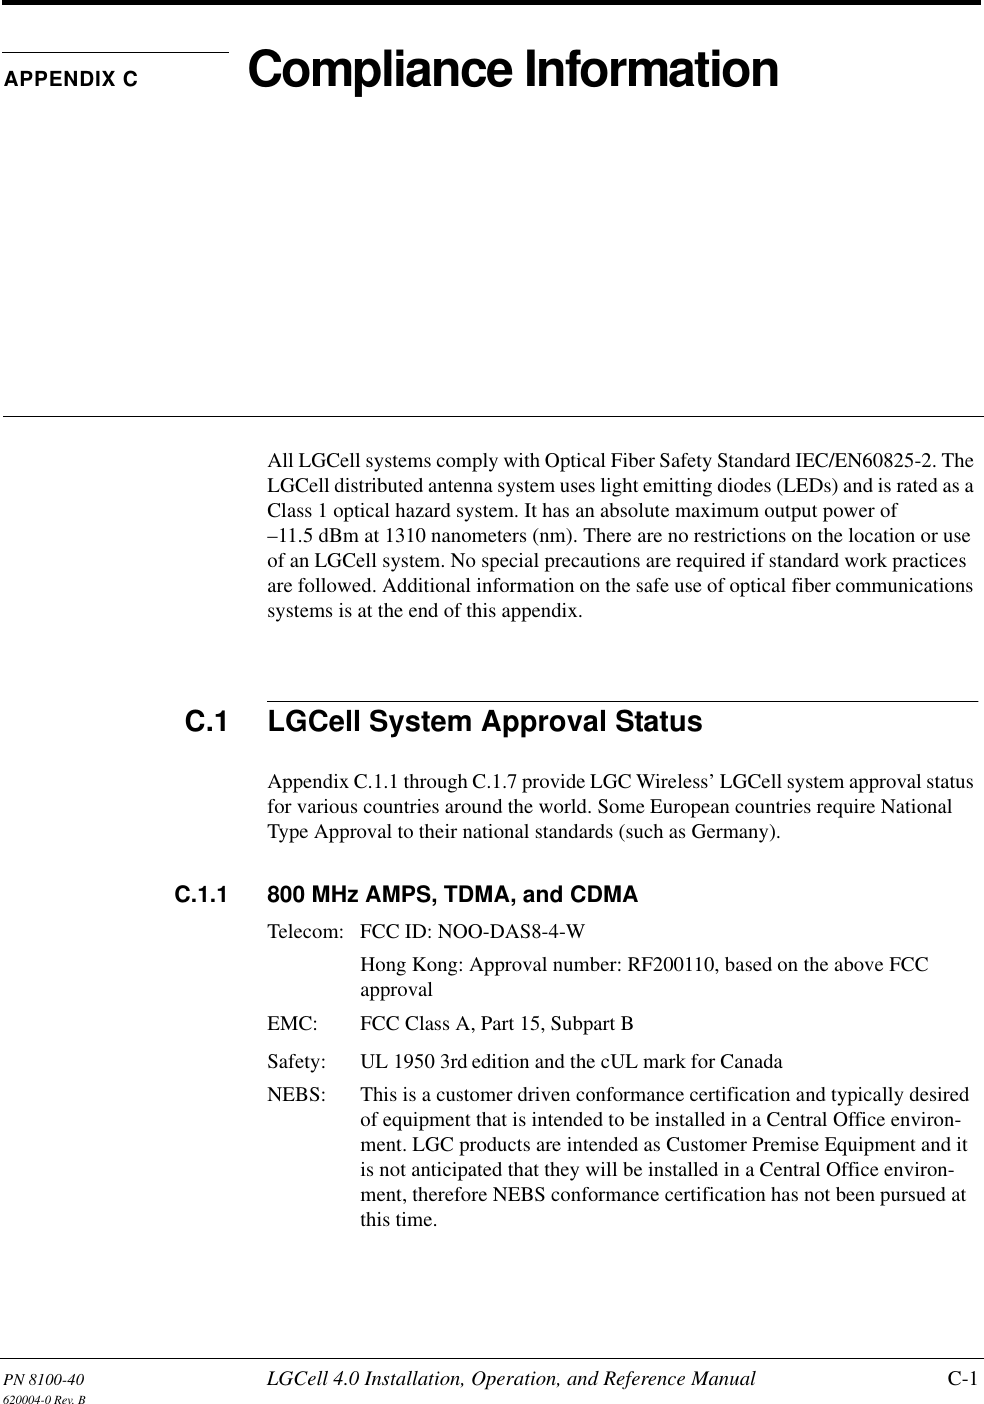 PN 8100-40 LGCell 4.0 Installation, Operation, and Reference Manual C-1620004-0 Rev. BAPPENDIX C Compliance InformationAll LGCell systems comply with Optical Fiber Safety Standard IEC/EN60825-2. The LGCell distributed antenna system uses light emitting diodes (LEDs) and is rated as a Class 1 optical hazard system. It has an absolute maximum output power of –11.5 dBm at 1310 nanometers (nm). There are no restrictions on the location or use of an LGCell system. No special precautions are required if standard work practices are followed. Additional information on the safe use of optical fiber communications systems is at the end of this appendix.C.1 LGCell System Approval StatusAppendix C.1.1 through C.1.7 provide LGC Wireless’ LGCell system approval status for various countries around the world. Some European countries require National Type Approval to their national standards (such as Germany).C.1.1 800 MHz AMPS, TDMA, and CDMATelecom: FCC ID: NOO-DAS8-4-WHong Kong: Approval number: RF200110, based on the above FCC approvalEMC:  FCC Class A, Part 15, Subpart BSafety:  UL 1950 3rd edition and the cUL mark for CanadaNEBS:  This is a customer driven conformance certification and typically desired of equipment that is intended to be installed in a Central Office environ-ment. LGC products are intended as Customer Premise Equipment and it is not anticipated that they will be installed in a Central Office environ-ment, therefore NEBS conformance certification has not been pursued at this time.